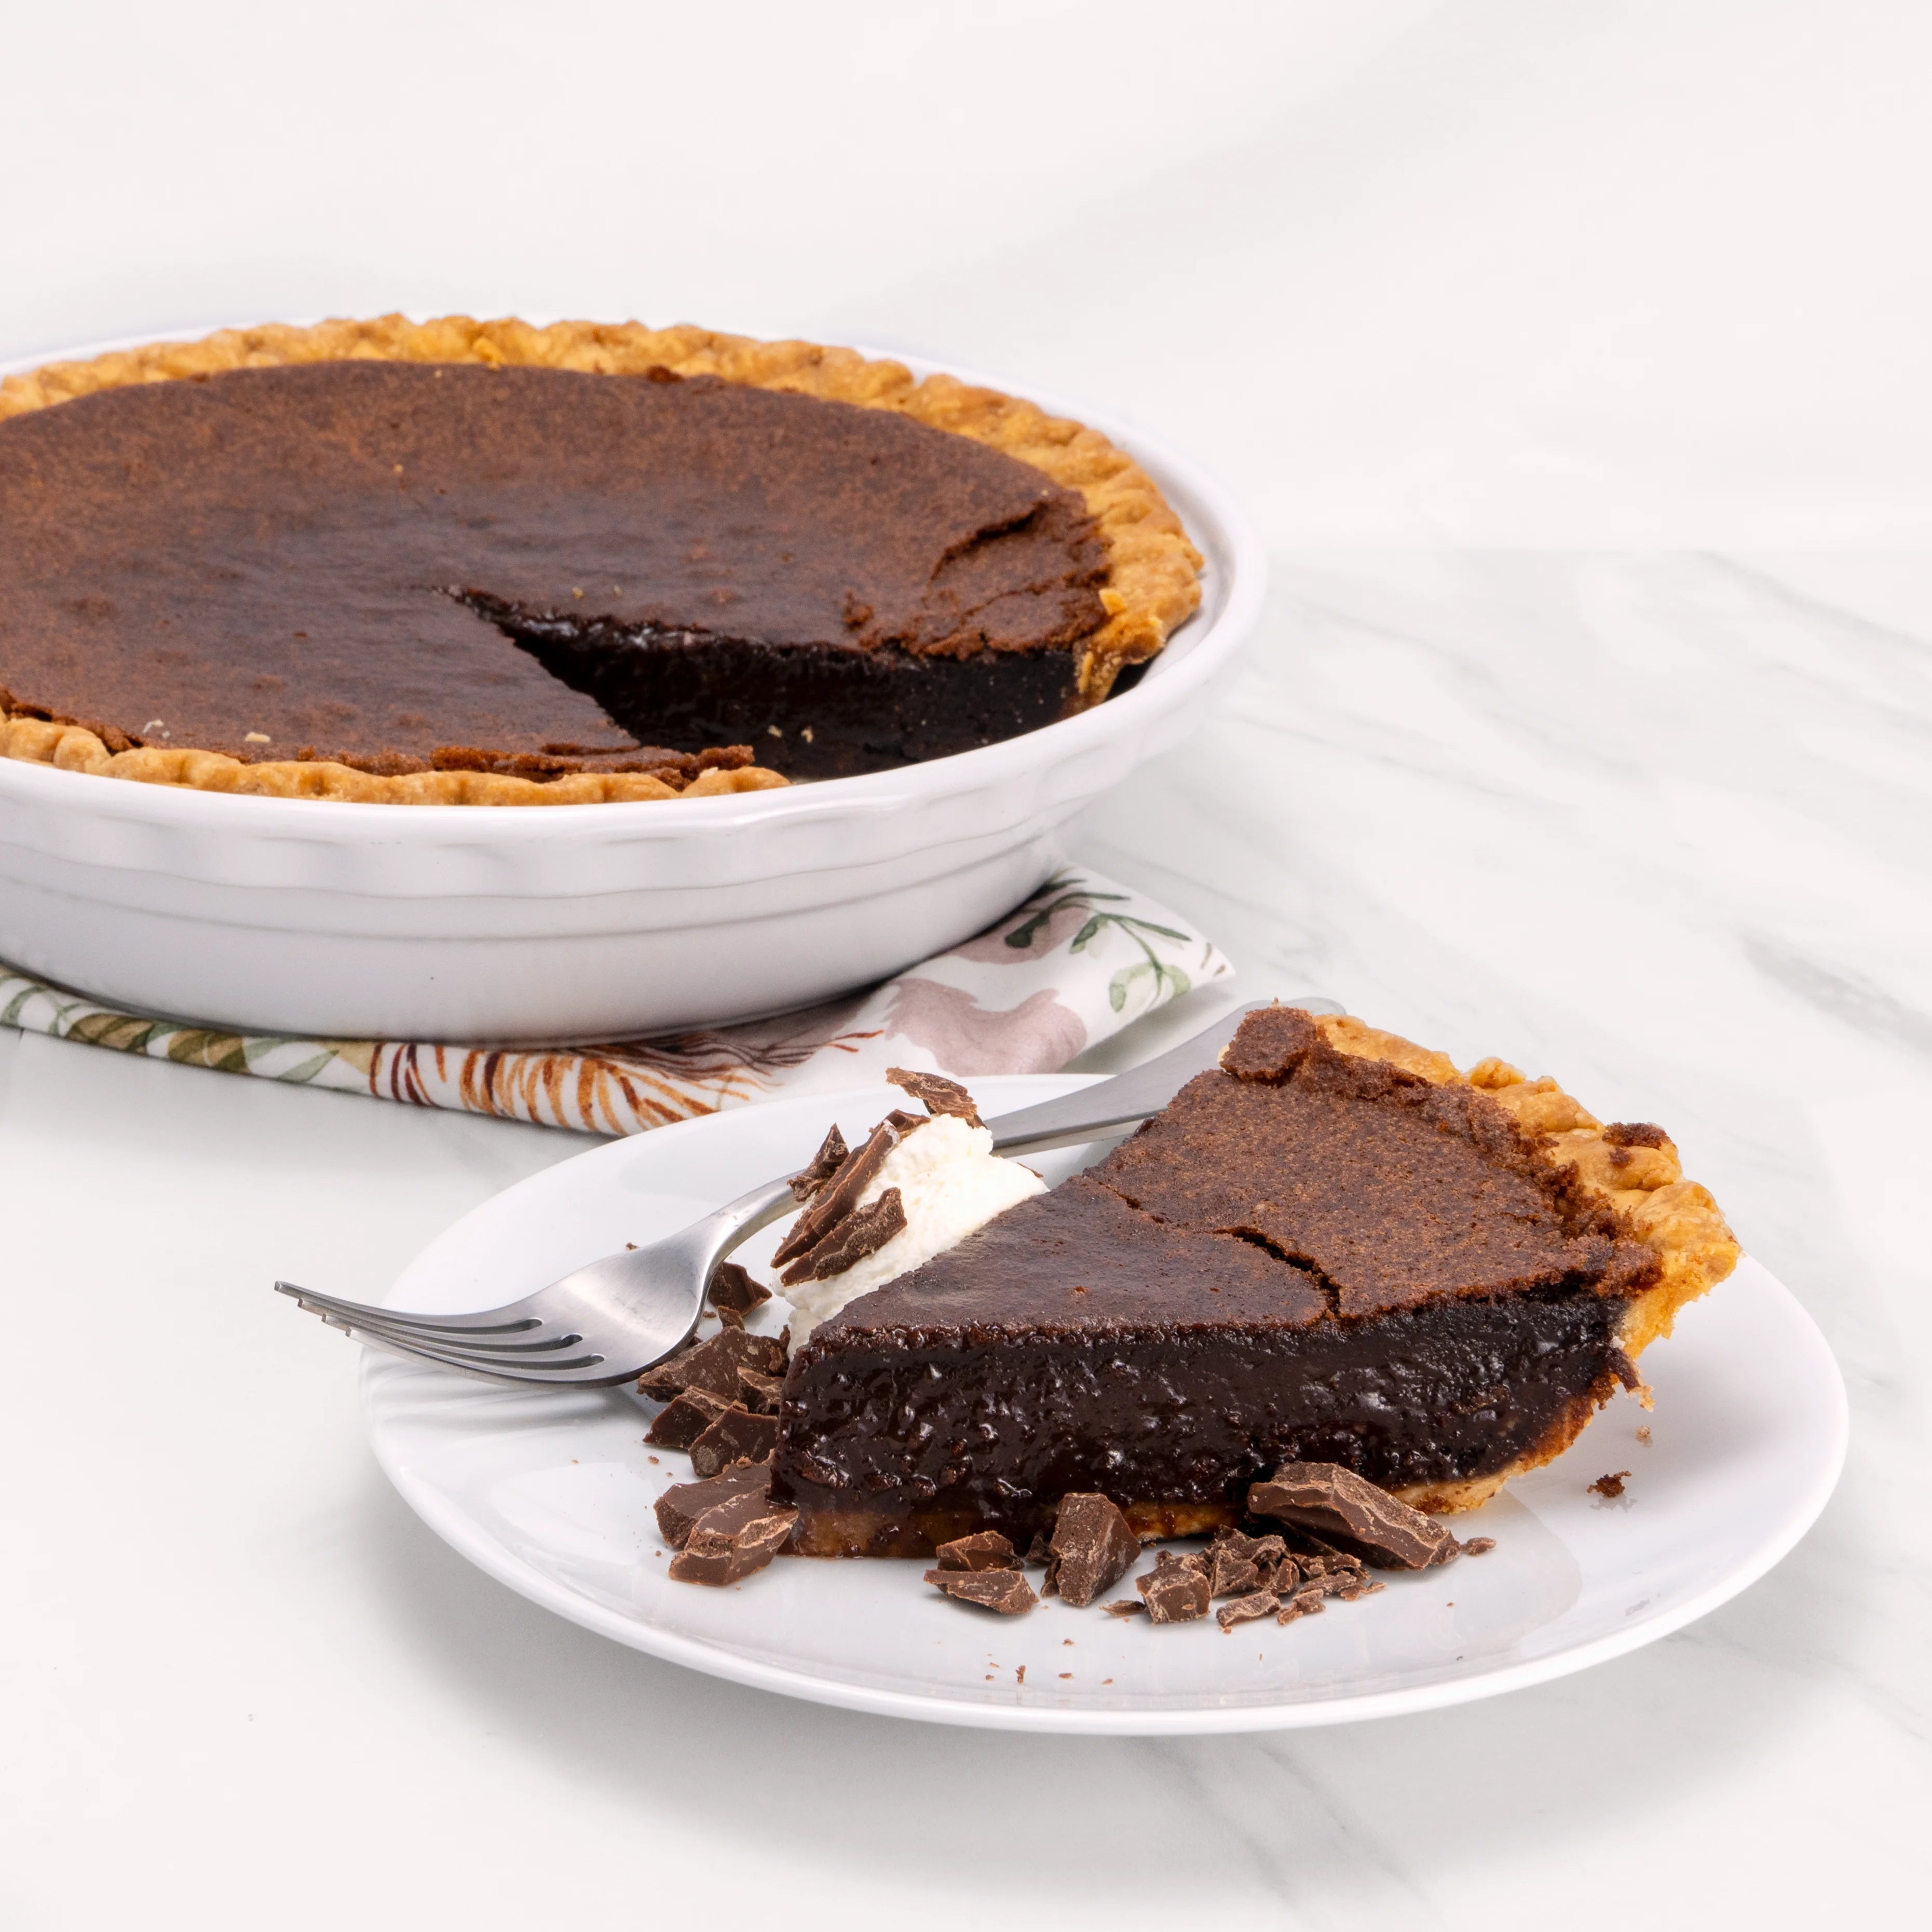 Slice of Heavenly Chocolate Pie, garnished with chocolate and a dollop of crème, in front of an 11" pie from which it was cut.